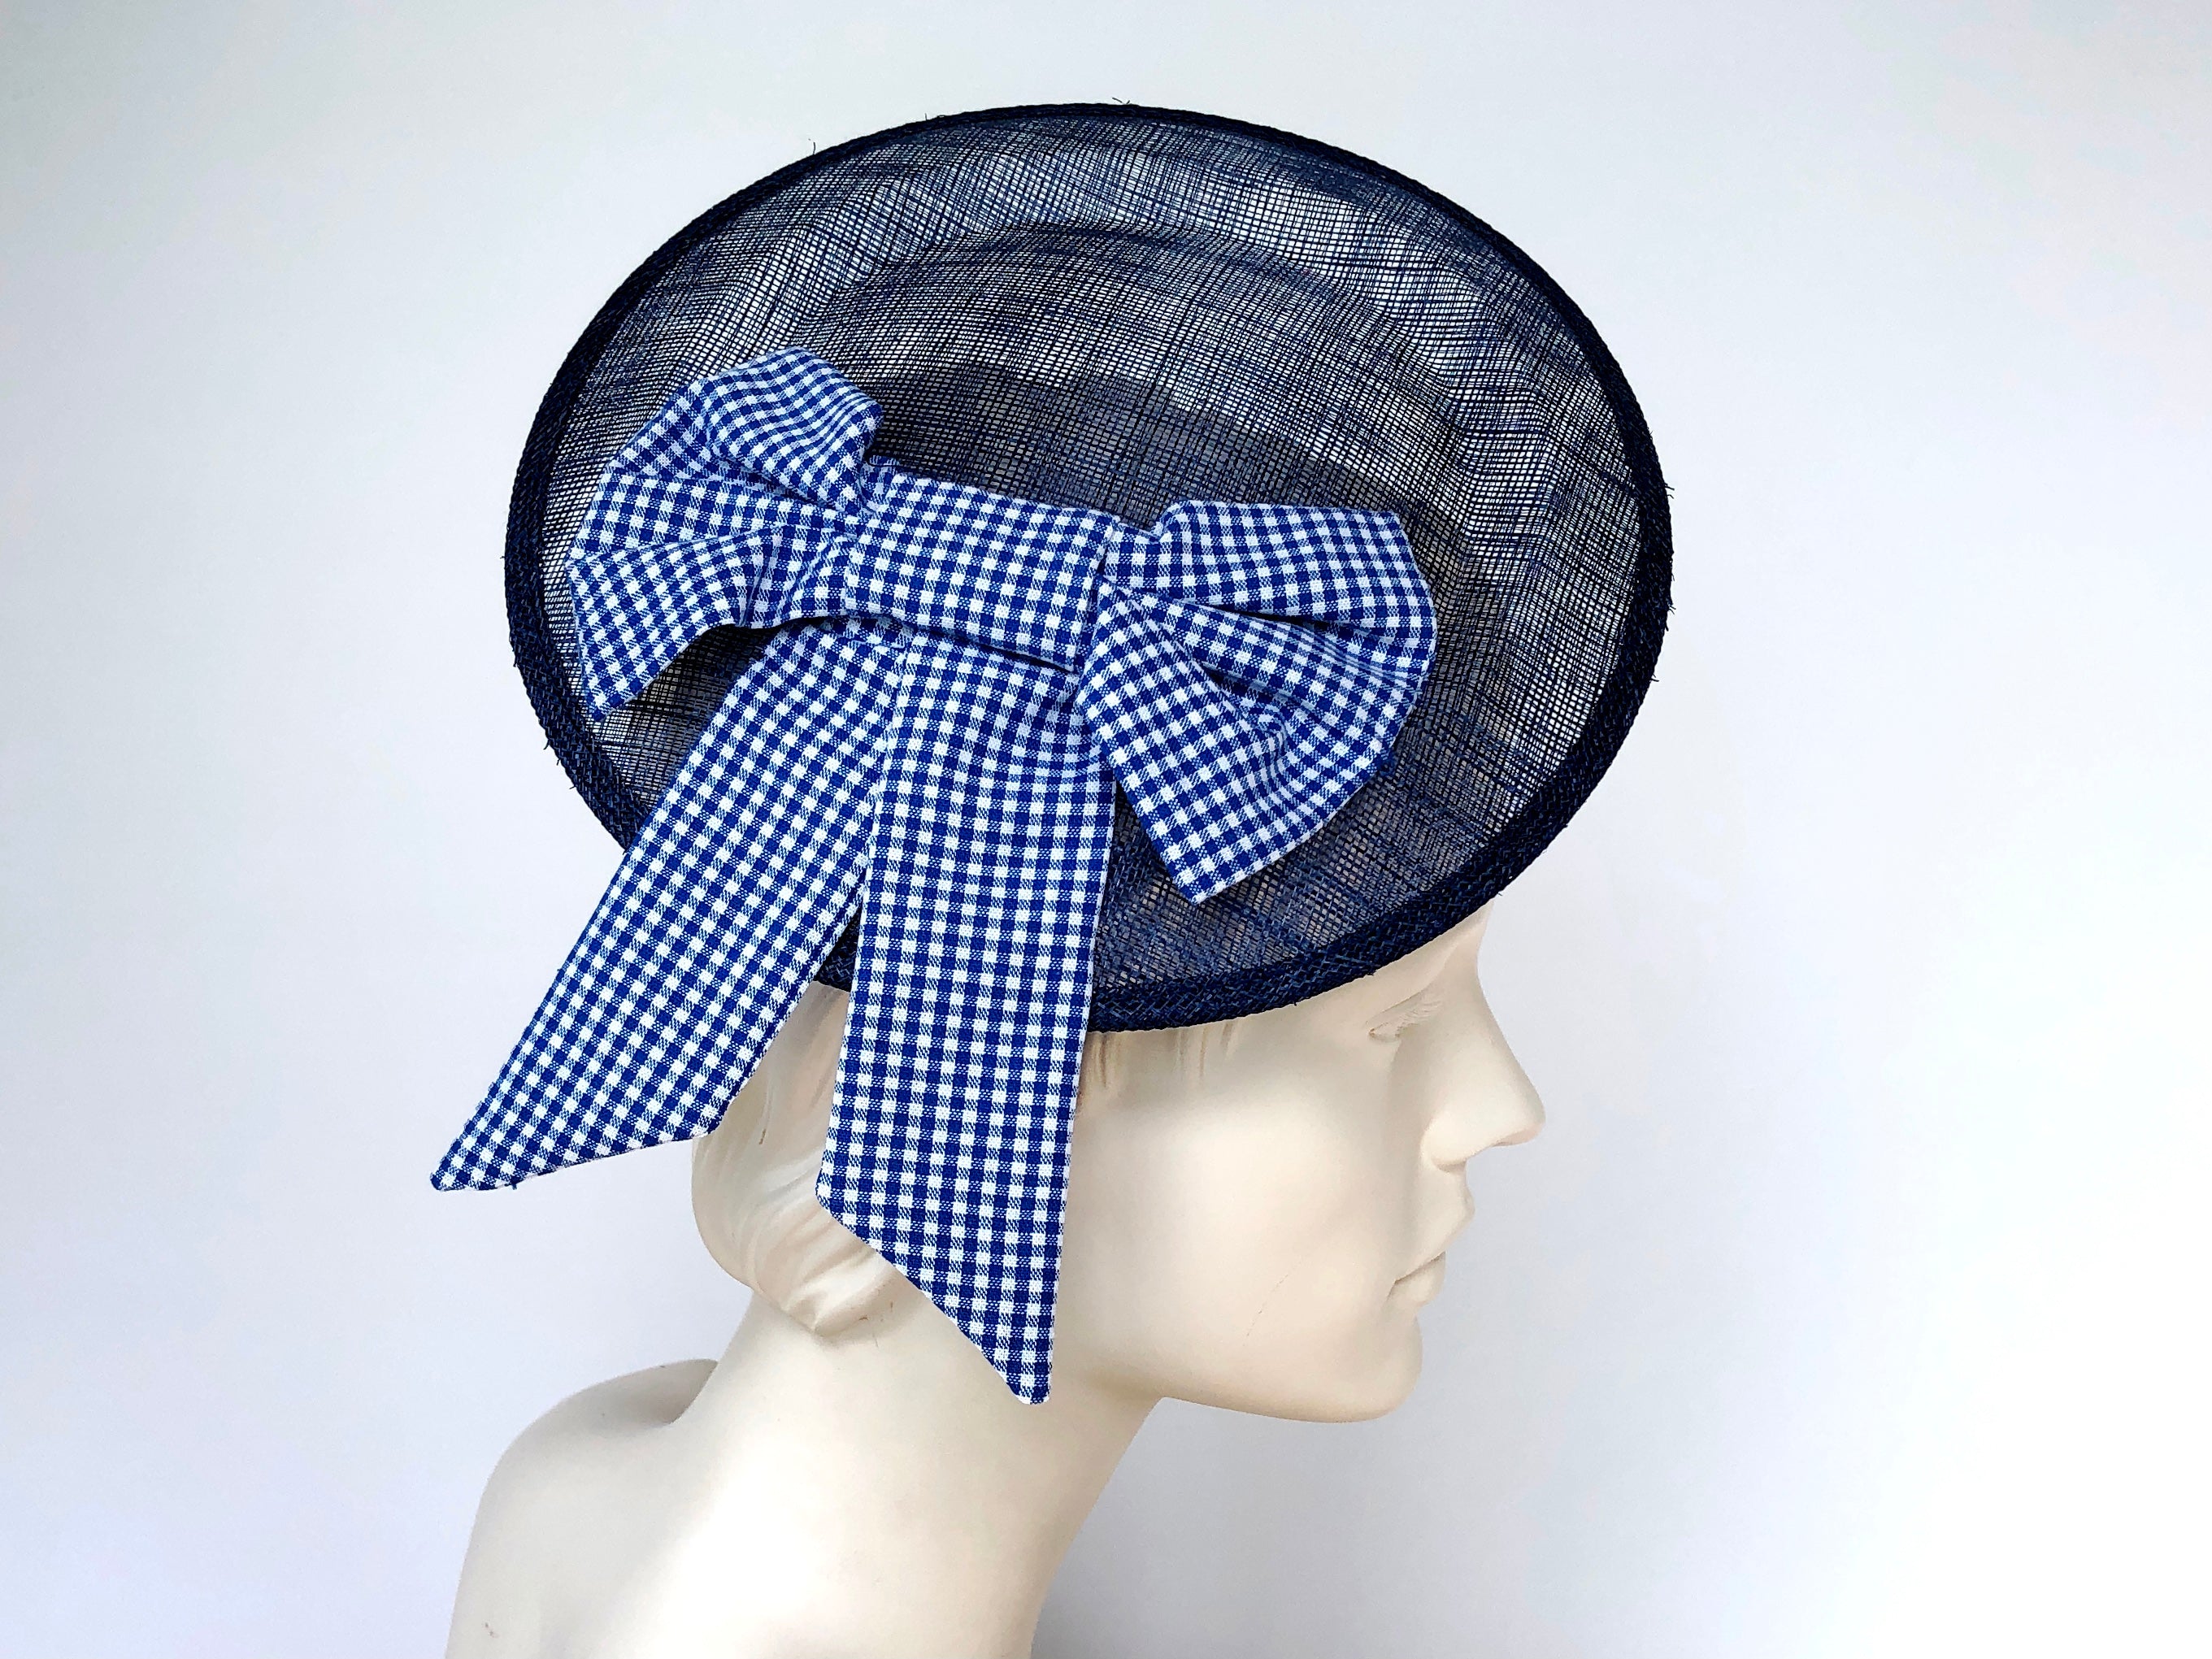 STATEMENT HAT - FRESH VINTAGE STYLE HAT WITH VICHY CHECK BOW